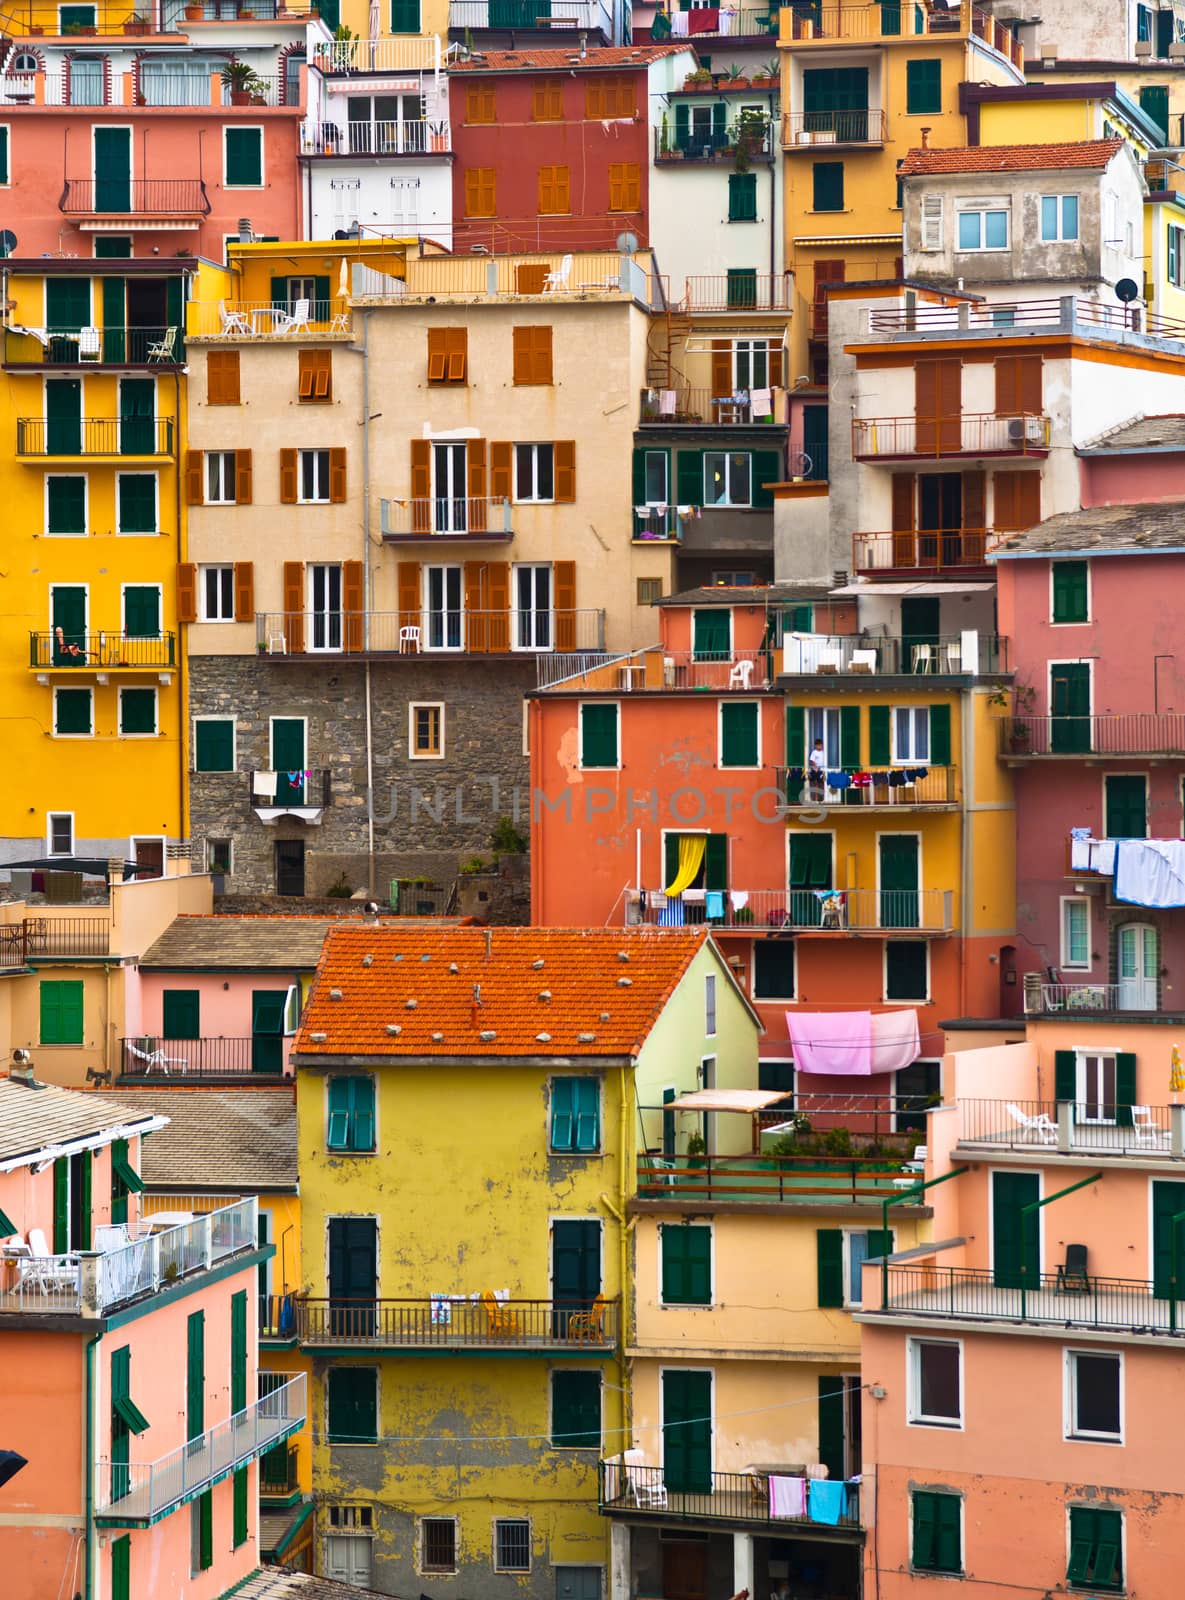 Colourful house frontings forming a beautiful background pattern. Manarola village, Cinque Terre, Italy. Vertical composition.